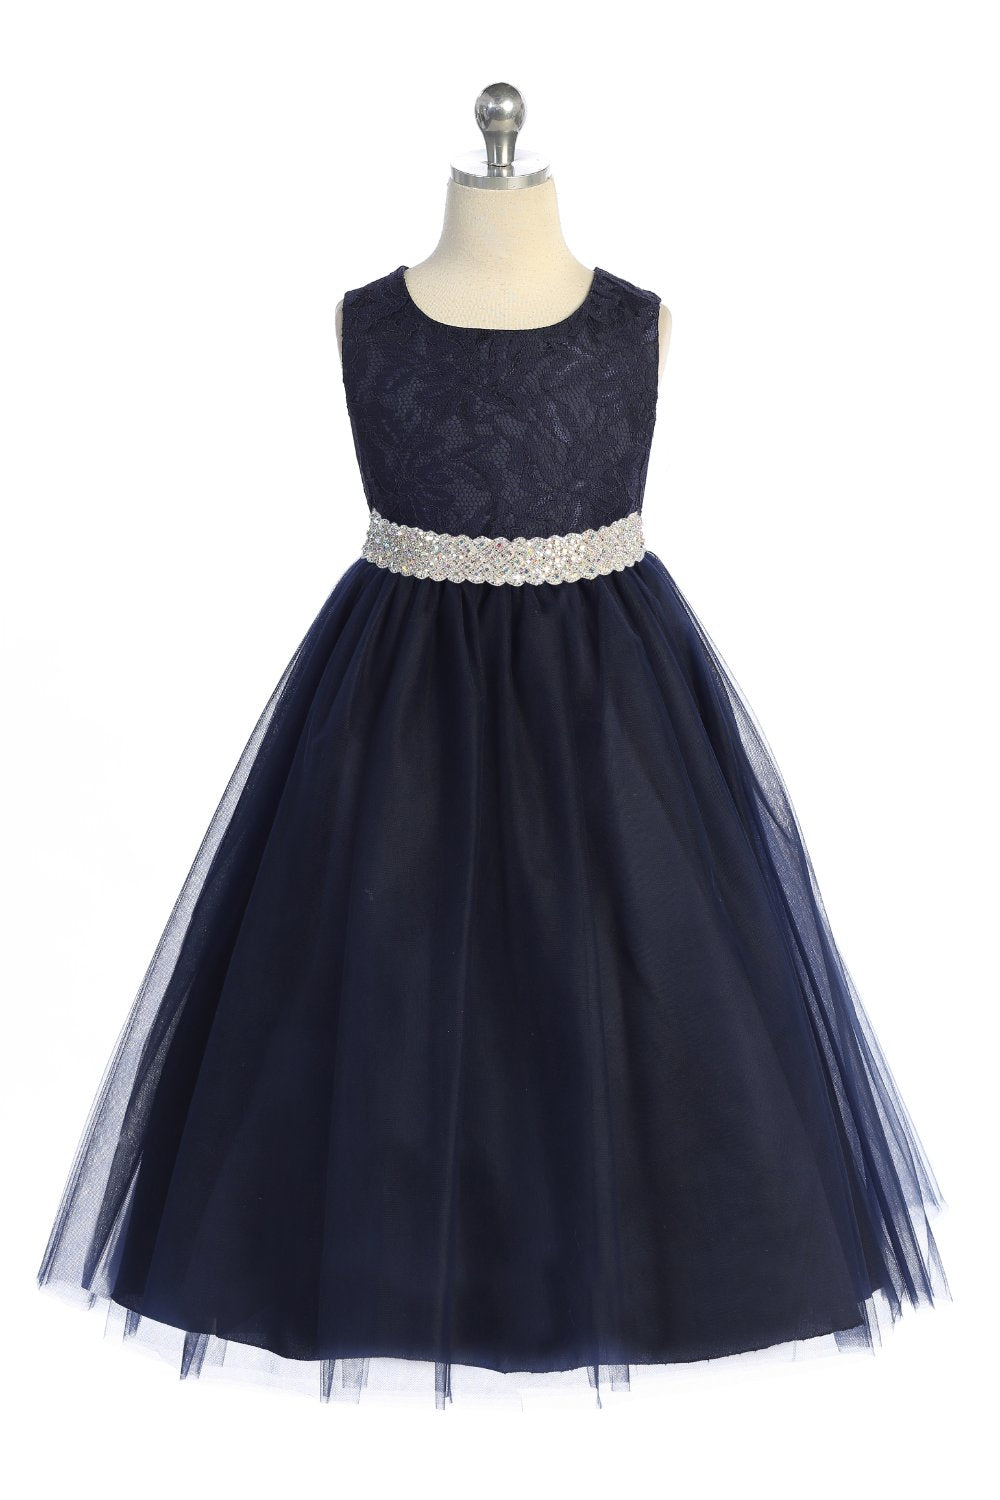 Long Lace Illusion with Thick Rhinestone Trim Girl Party Dress by AS524-E Kids Dream - Girl Formal Dresses